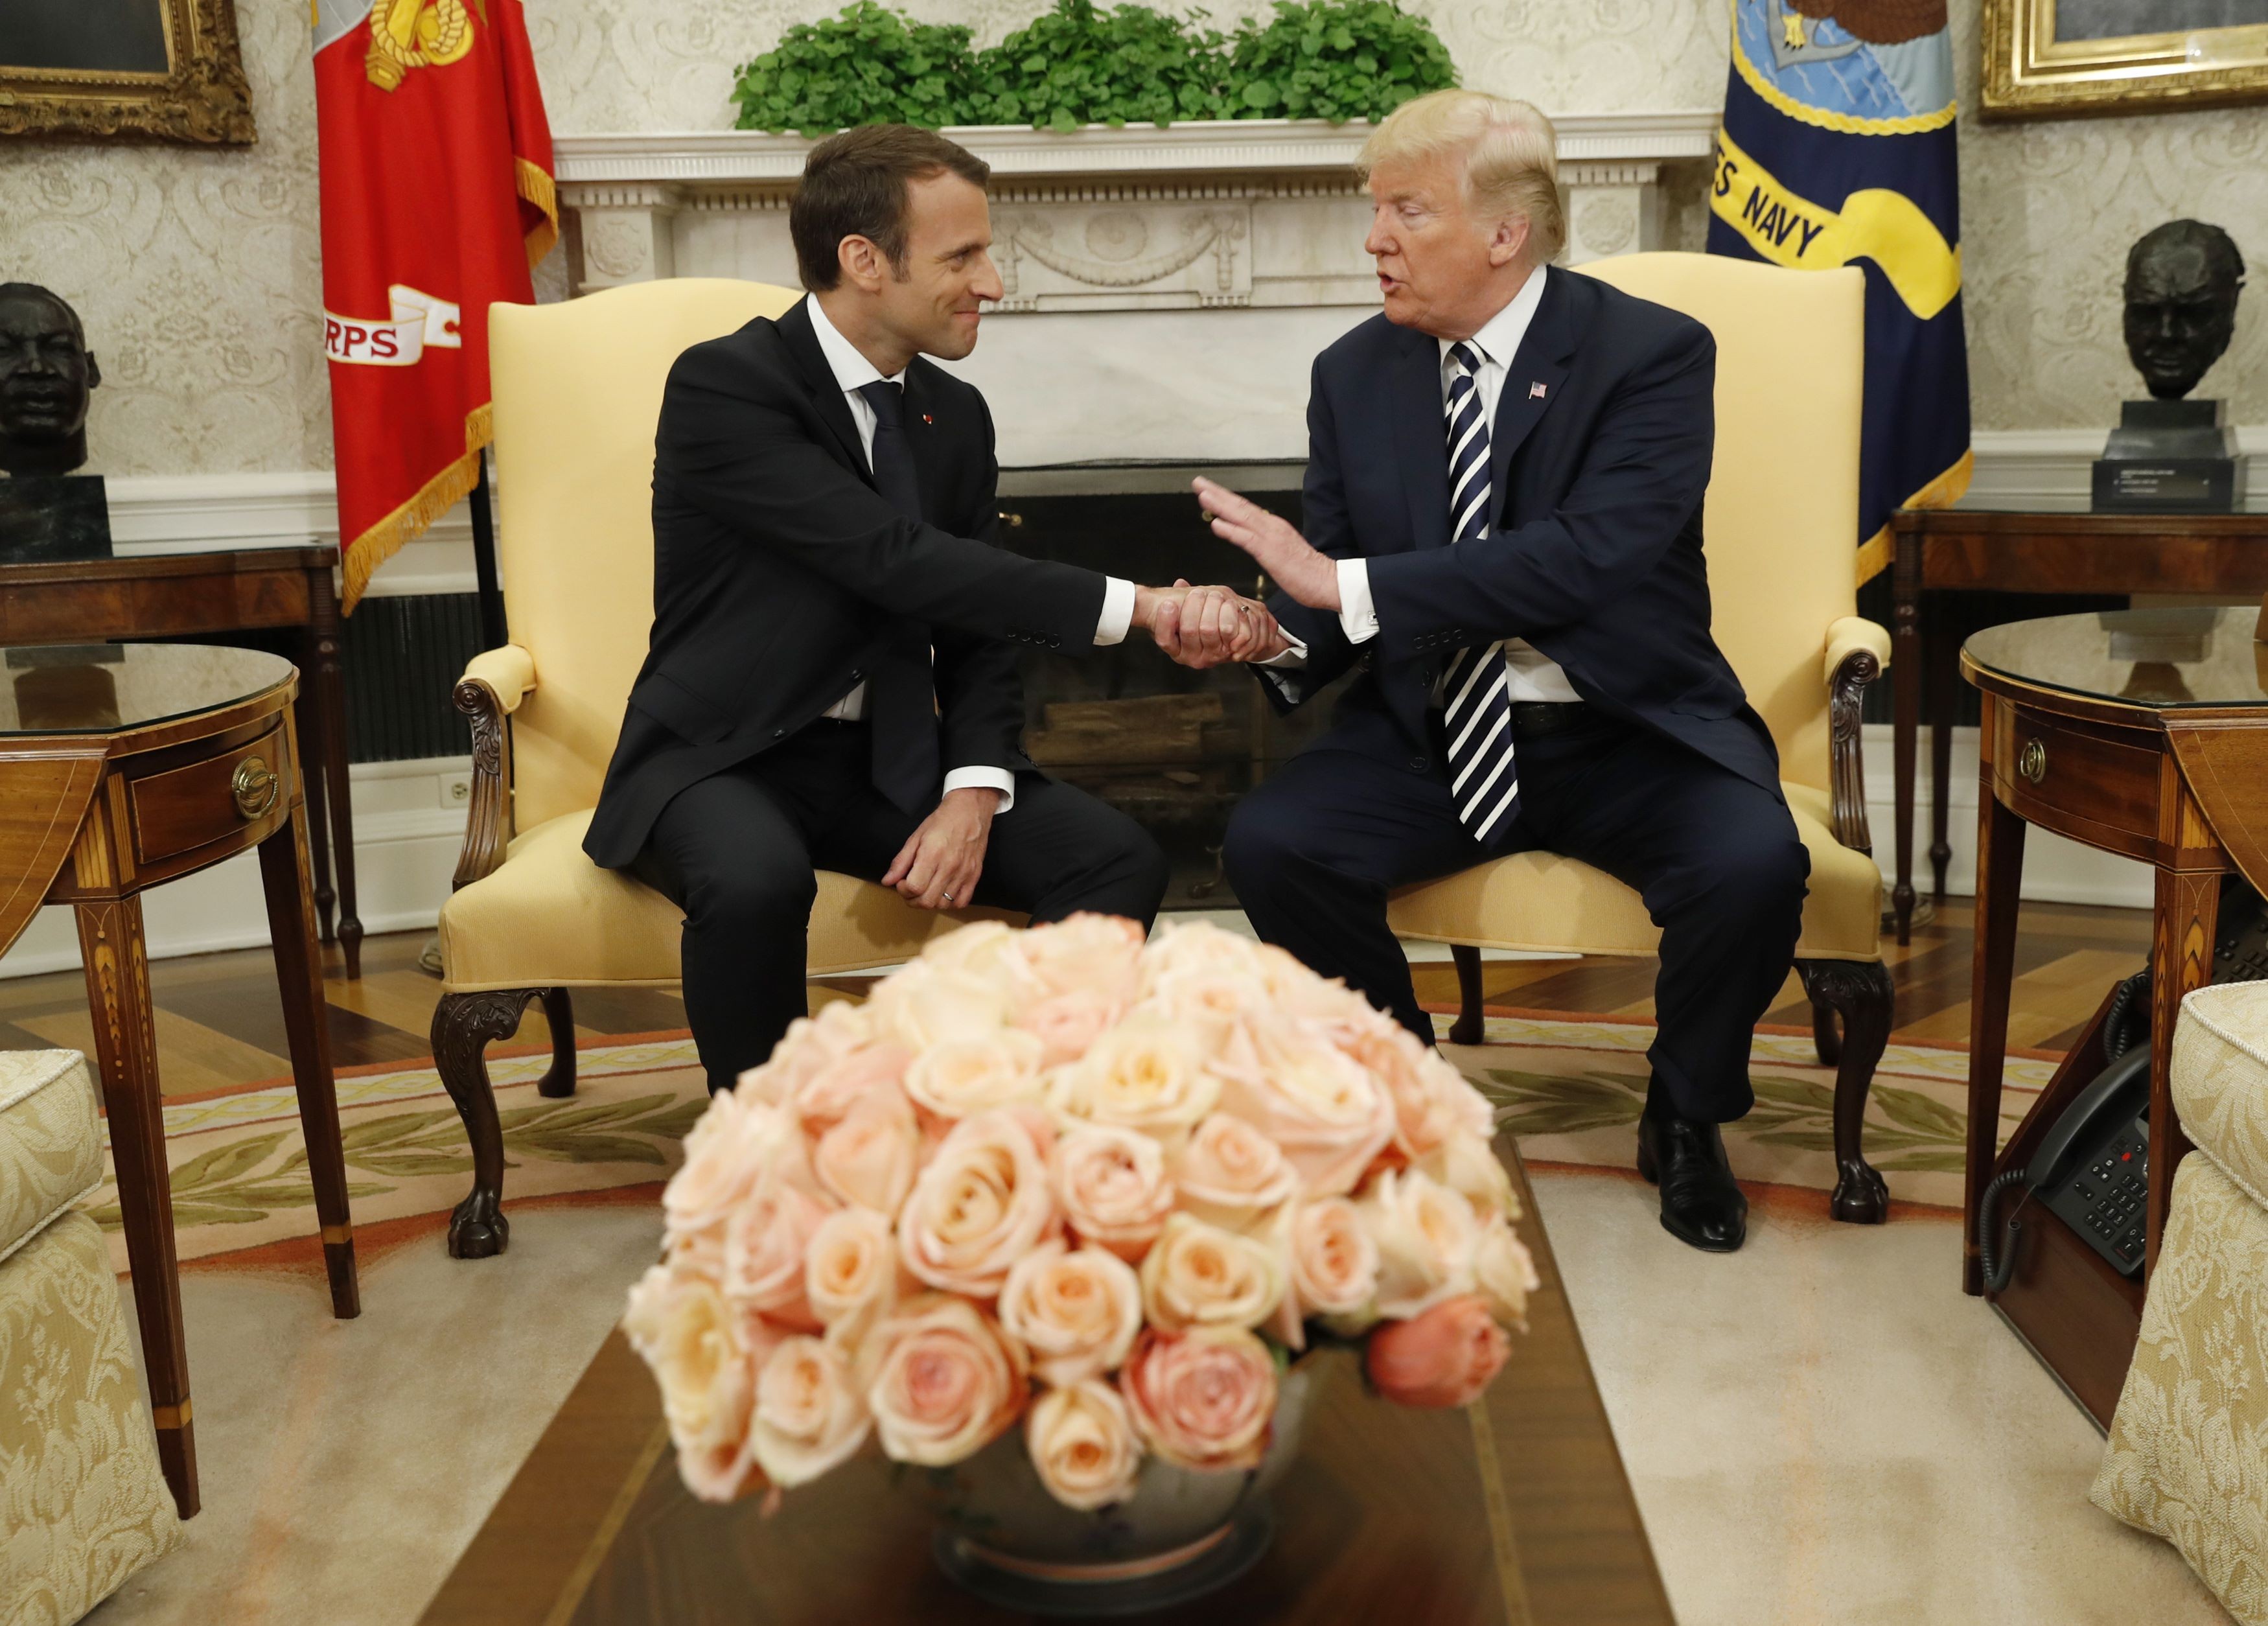 Donald Trump welcomes Emmanuel Macron to the White House on Tuesday. Photo: Reuters